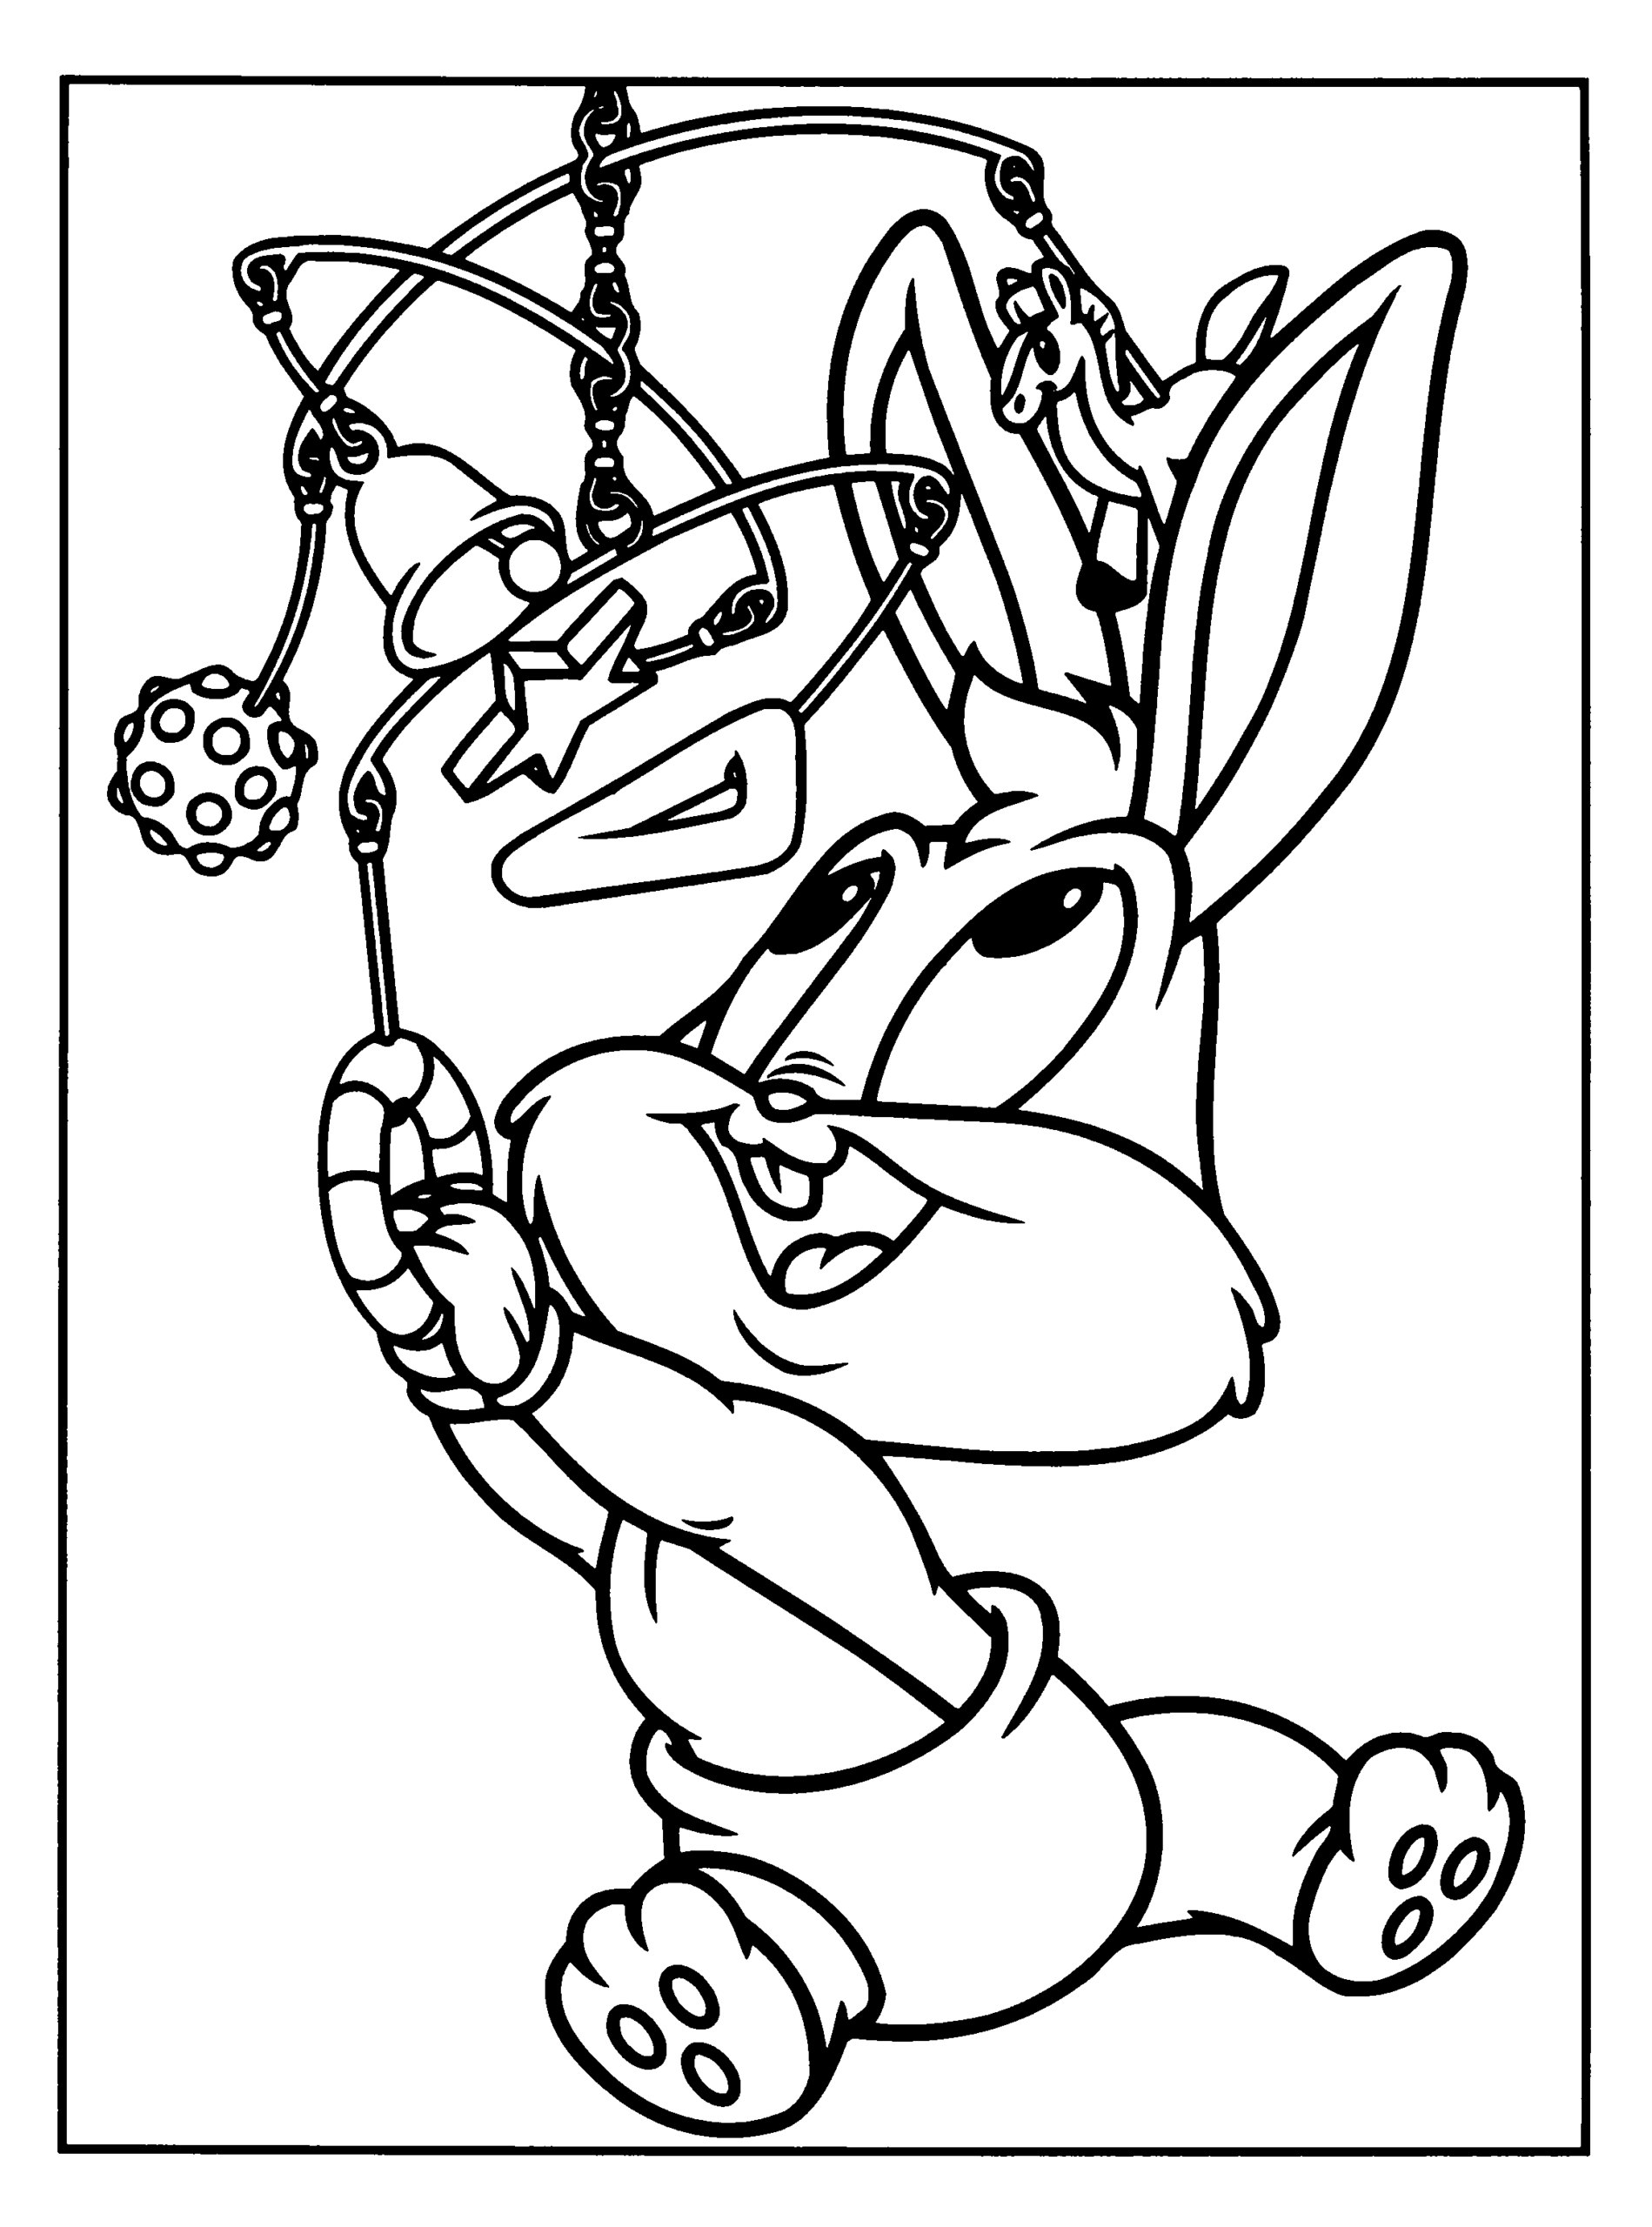 Looney Tunes Coloring Pages TV Film looney tunes 22 Printable 2020 04589 Coloring4free